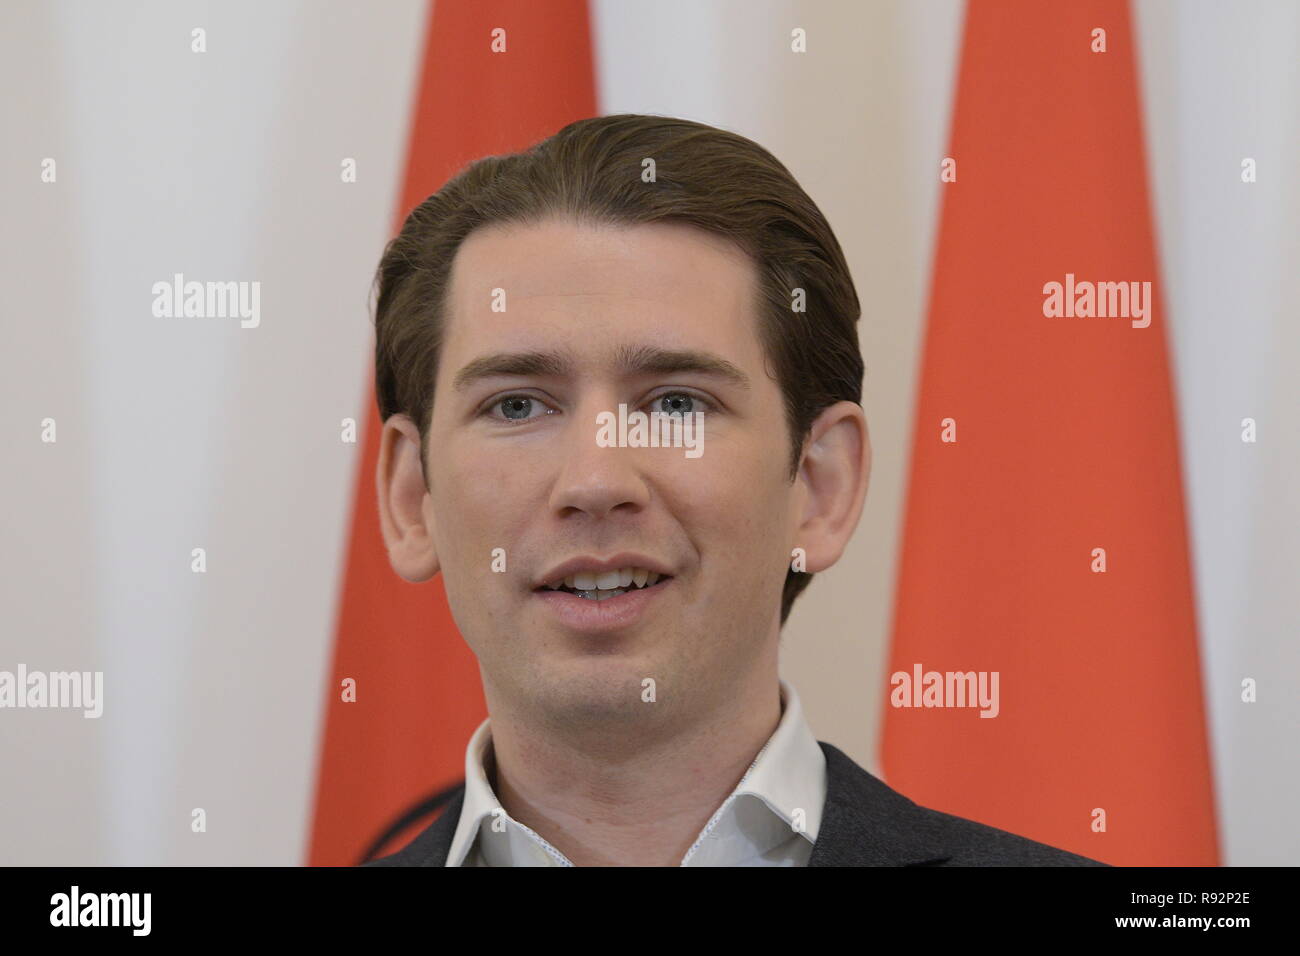 Vienna, Austria. 19 December 2018. Council of Ministers and press lobby in the Federal Chancellery. Picture shows Chancellor of the Republic of Austria, Sebastian Kurz. Credit: Franz Perc / Alamy Live News Stock Photo